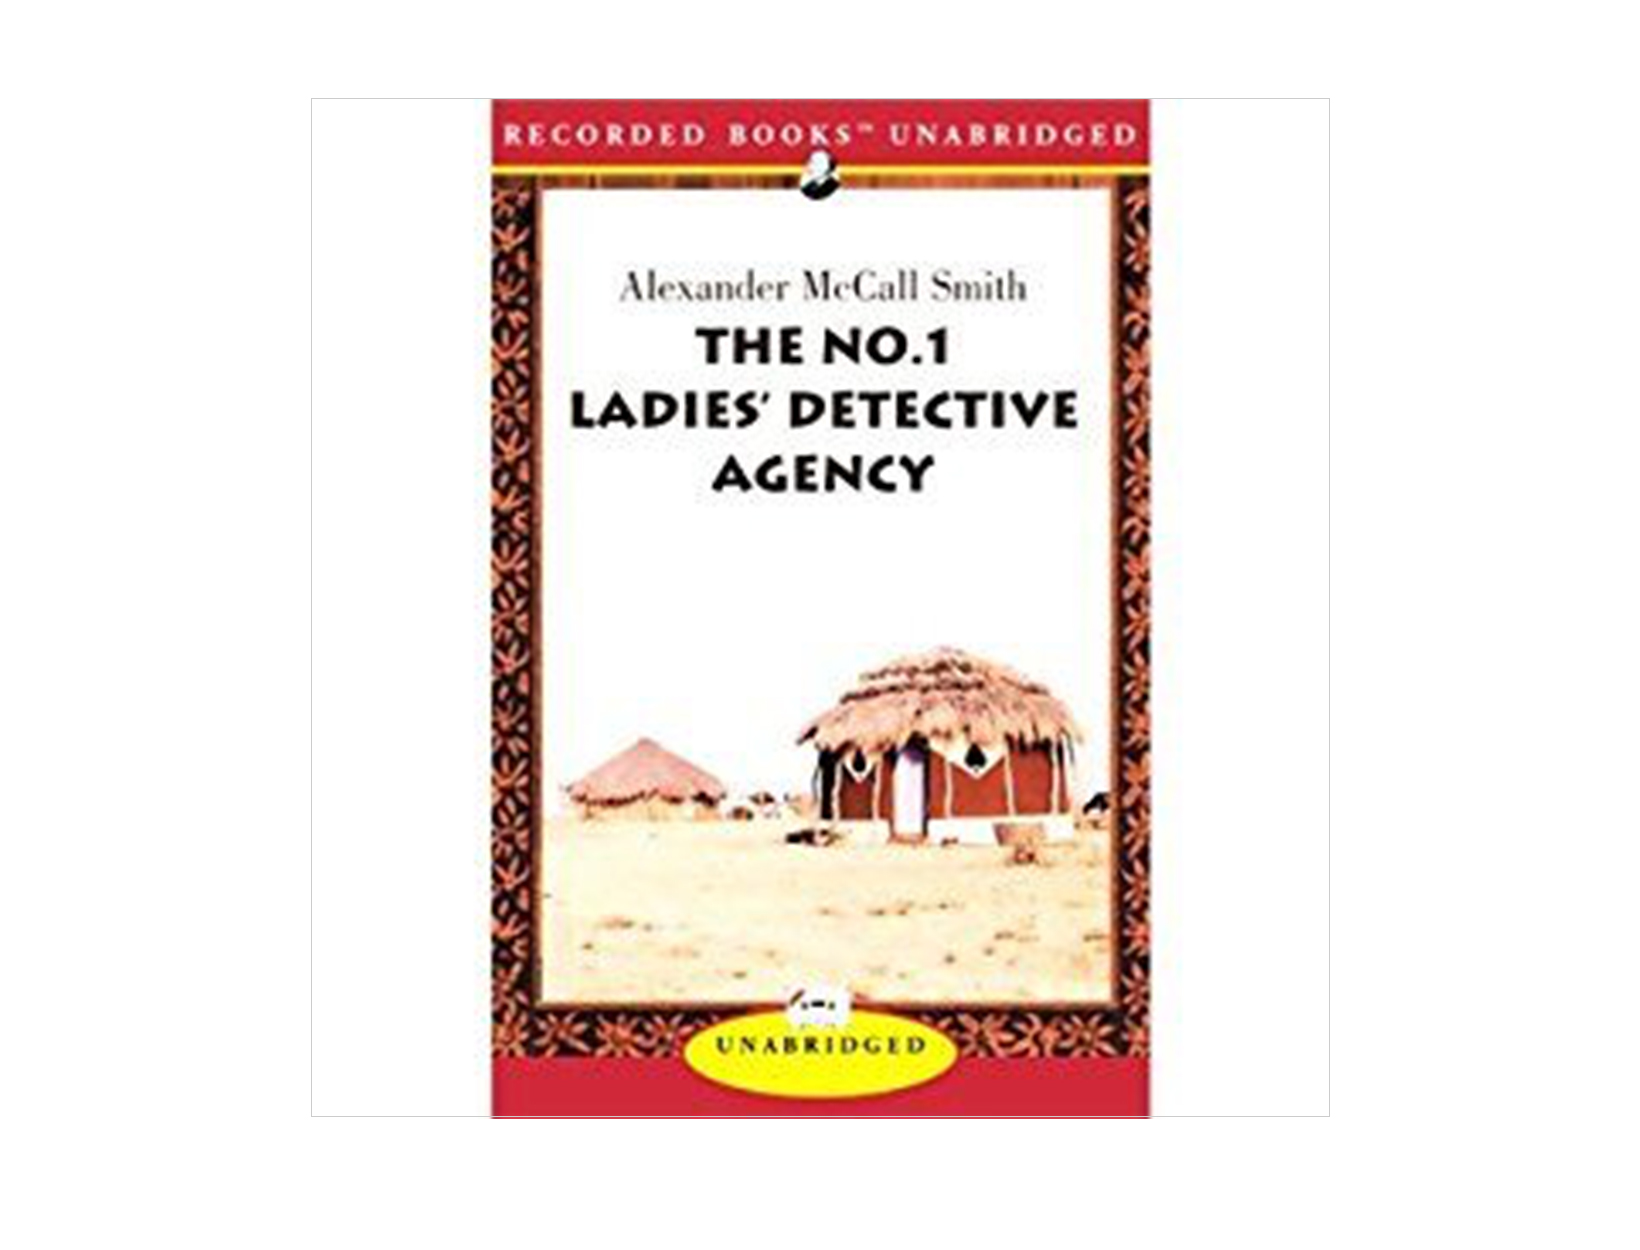 The No. 1 Ladies' Detective Agency by Alexander McCall Smith, read by Lisette Lecat